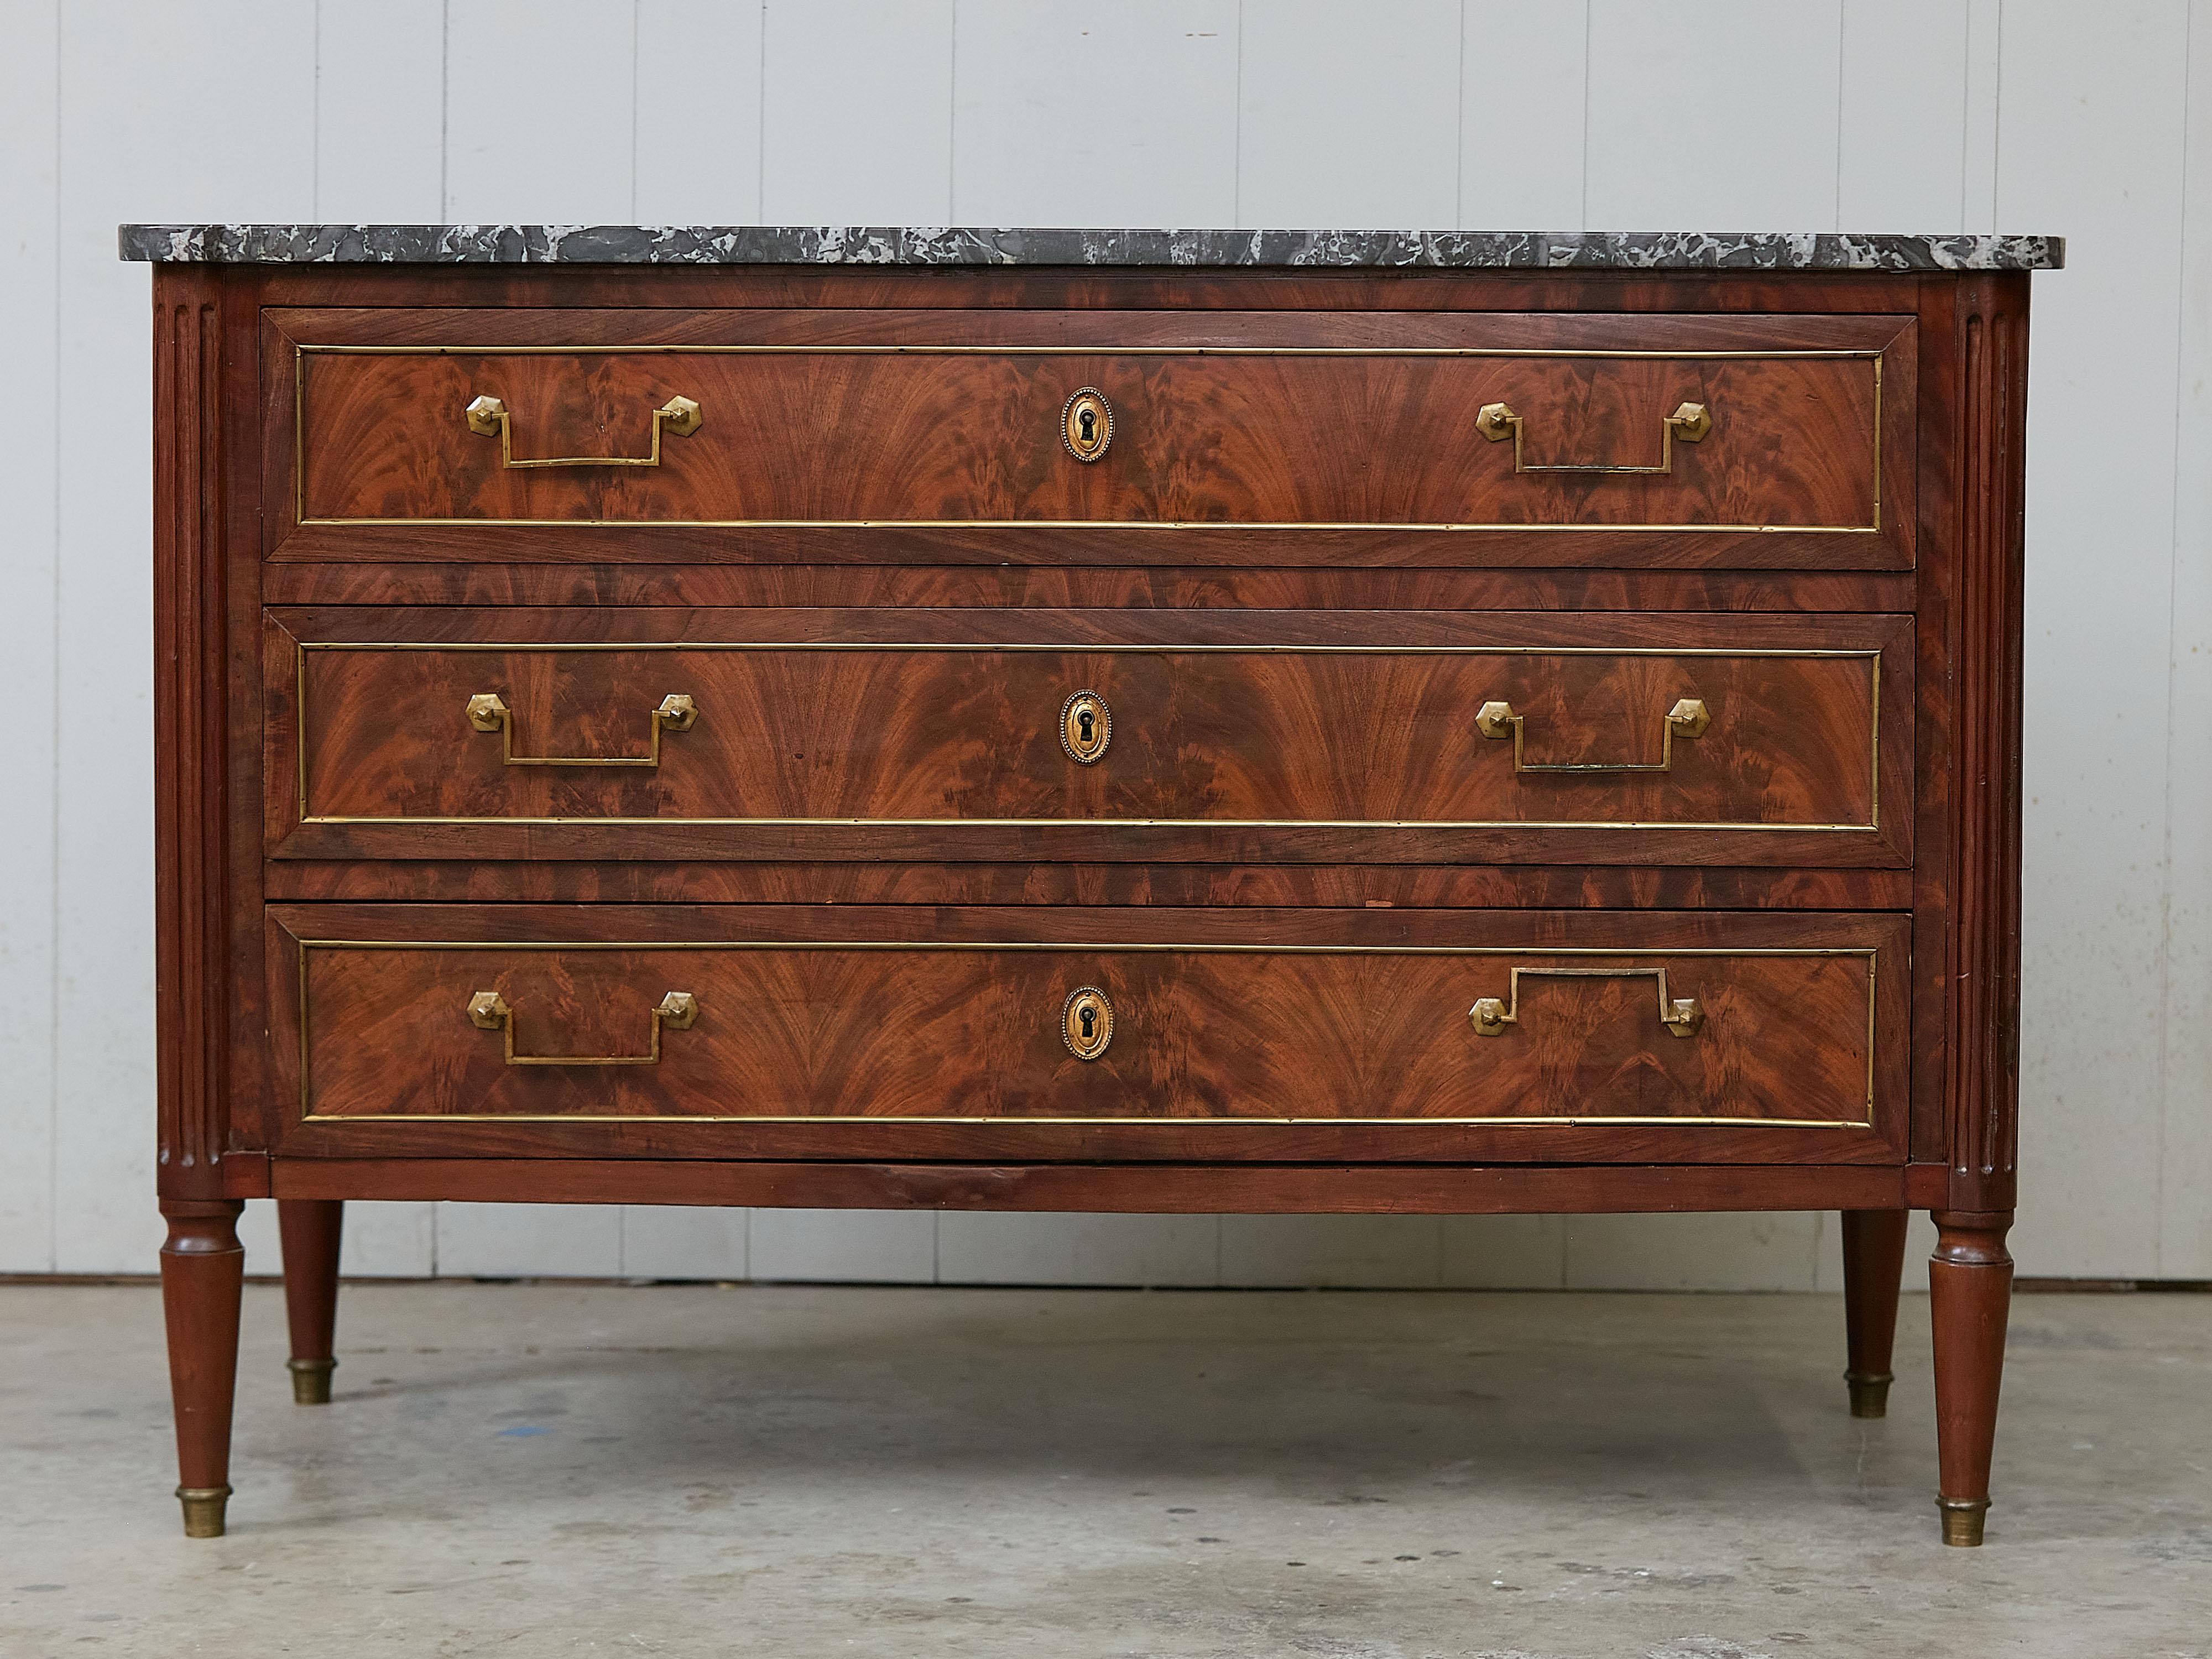 A French walnut commode from the 19th century, with butterfly veneer and grey marble top. Created in France during the 19th century, this walnut commode features a grey veined marble top with rounded corners in the front, sitting above three drawers